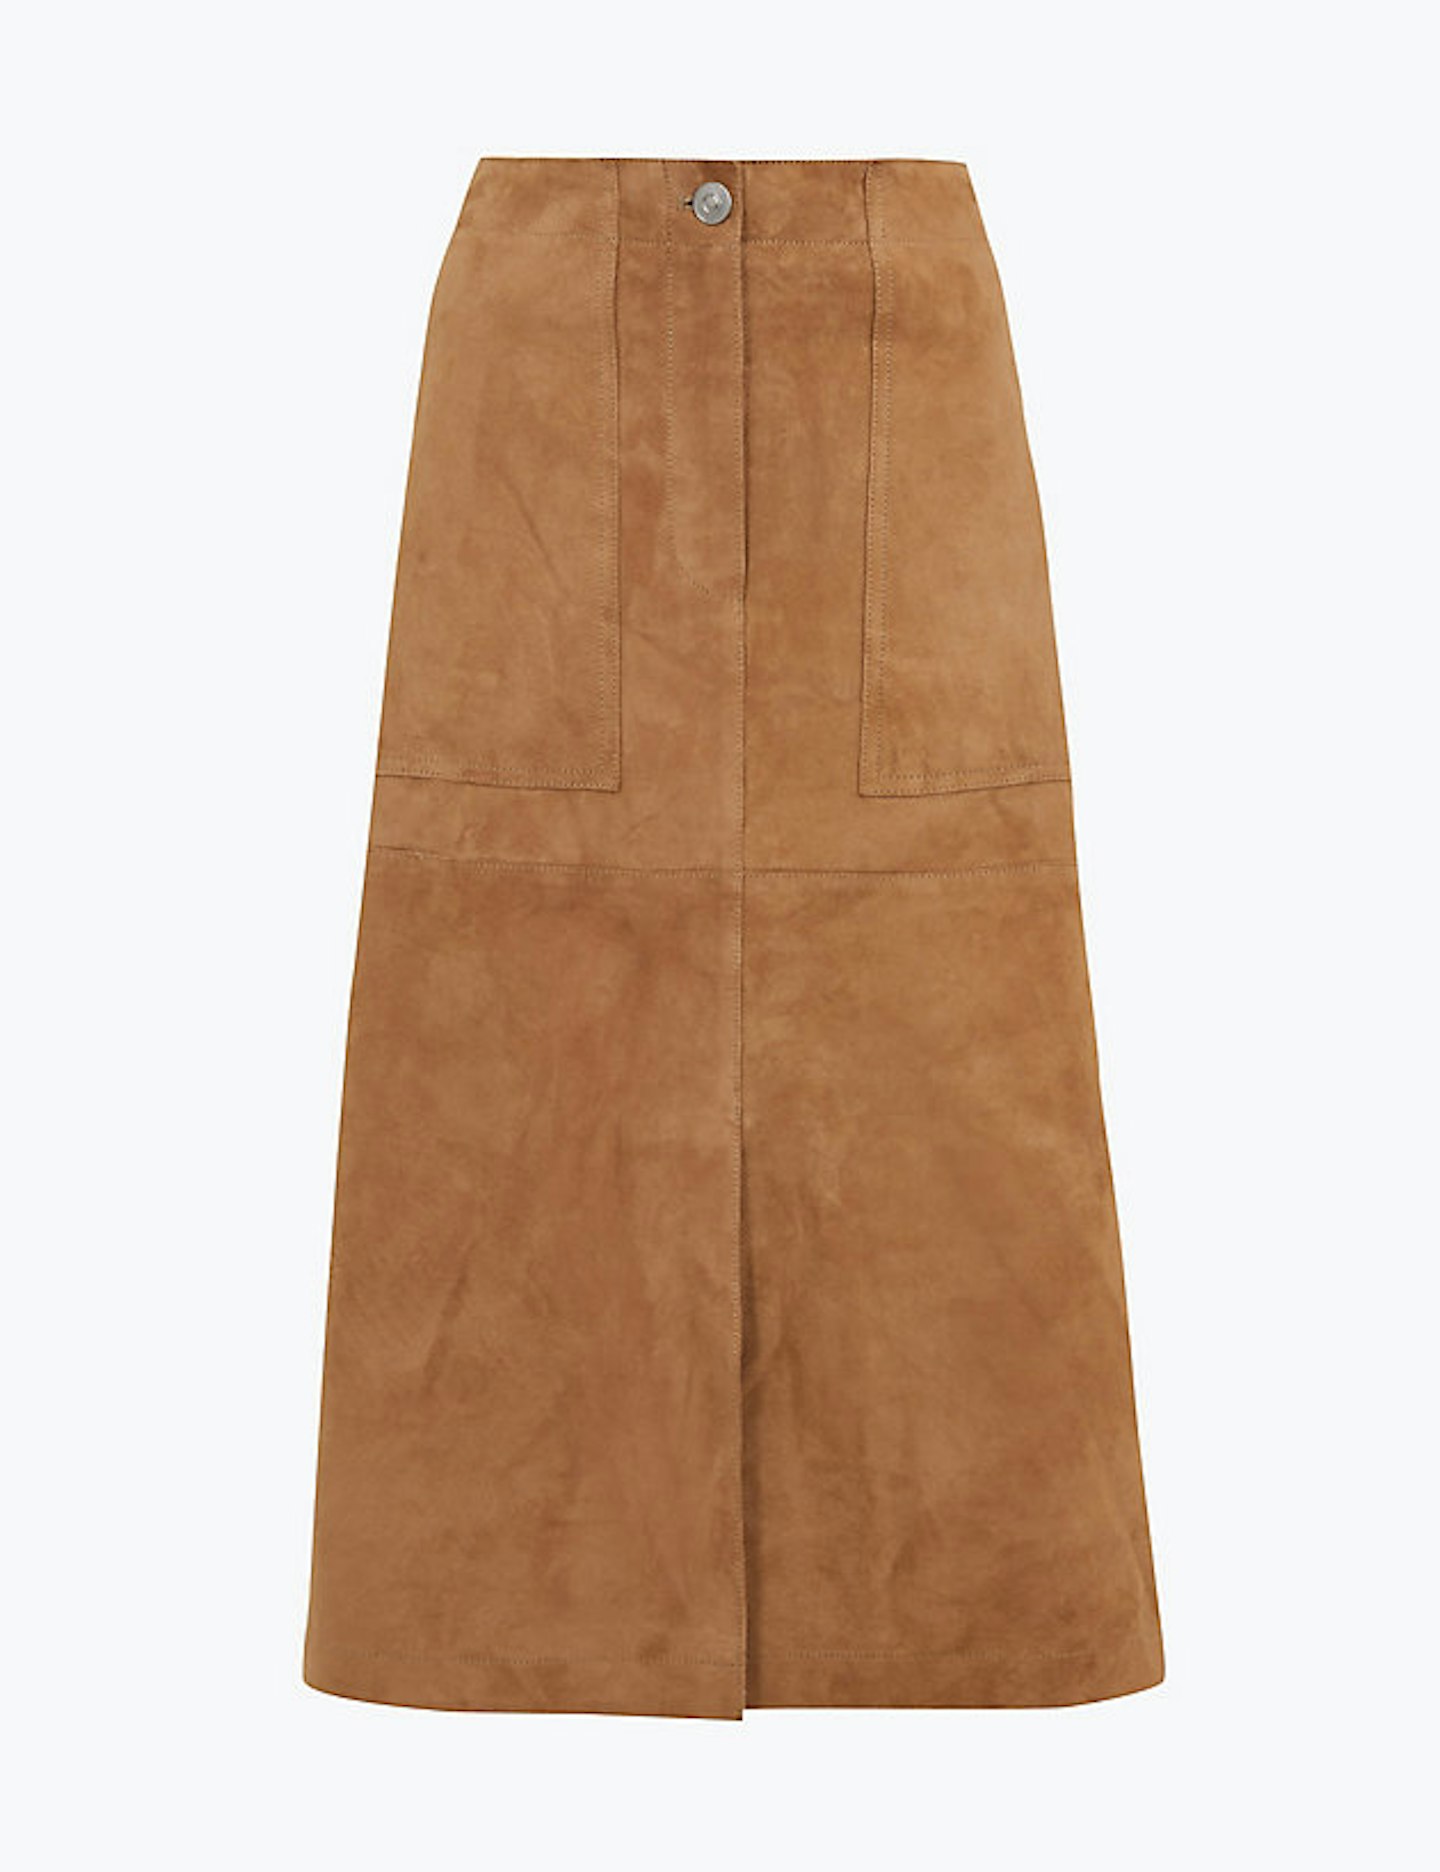 Suede A-Line Midi Skirt, £199